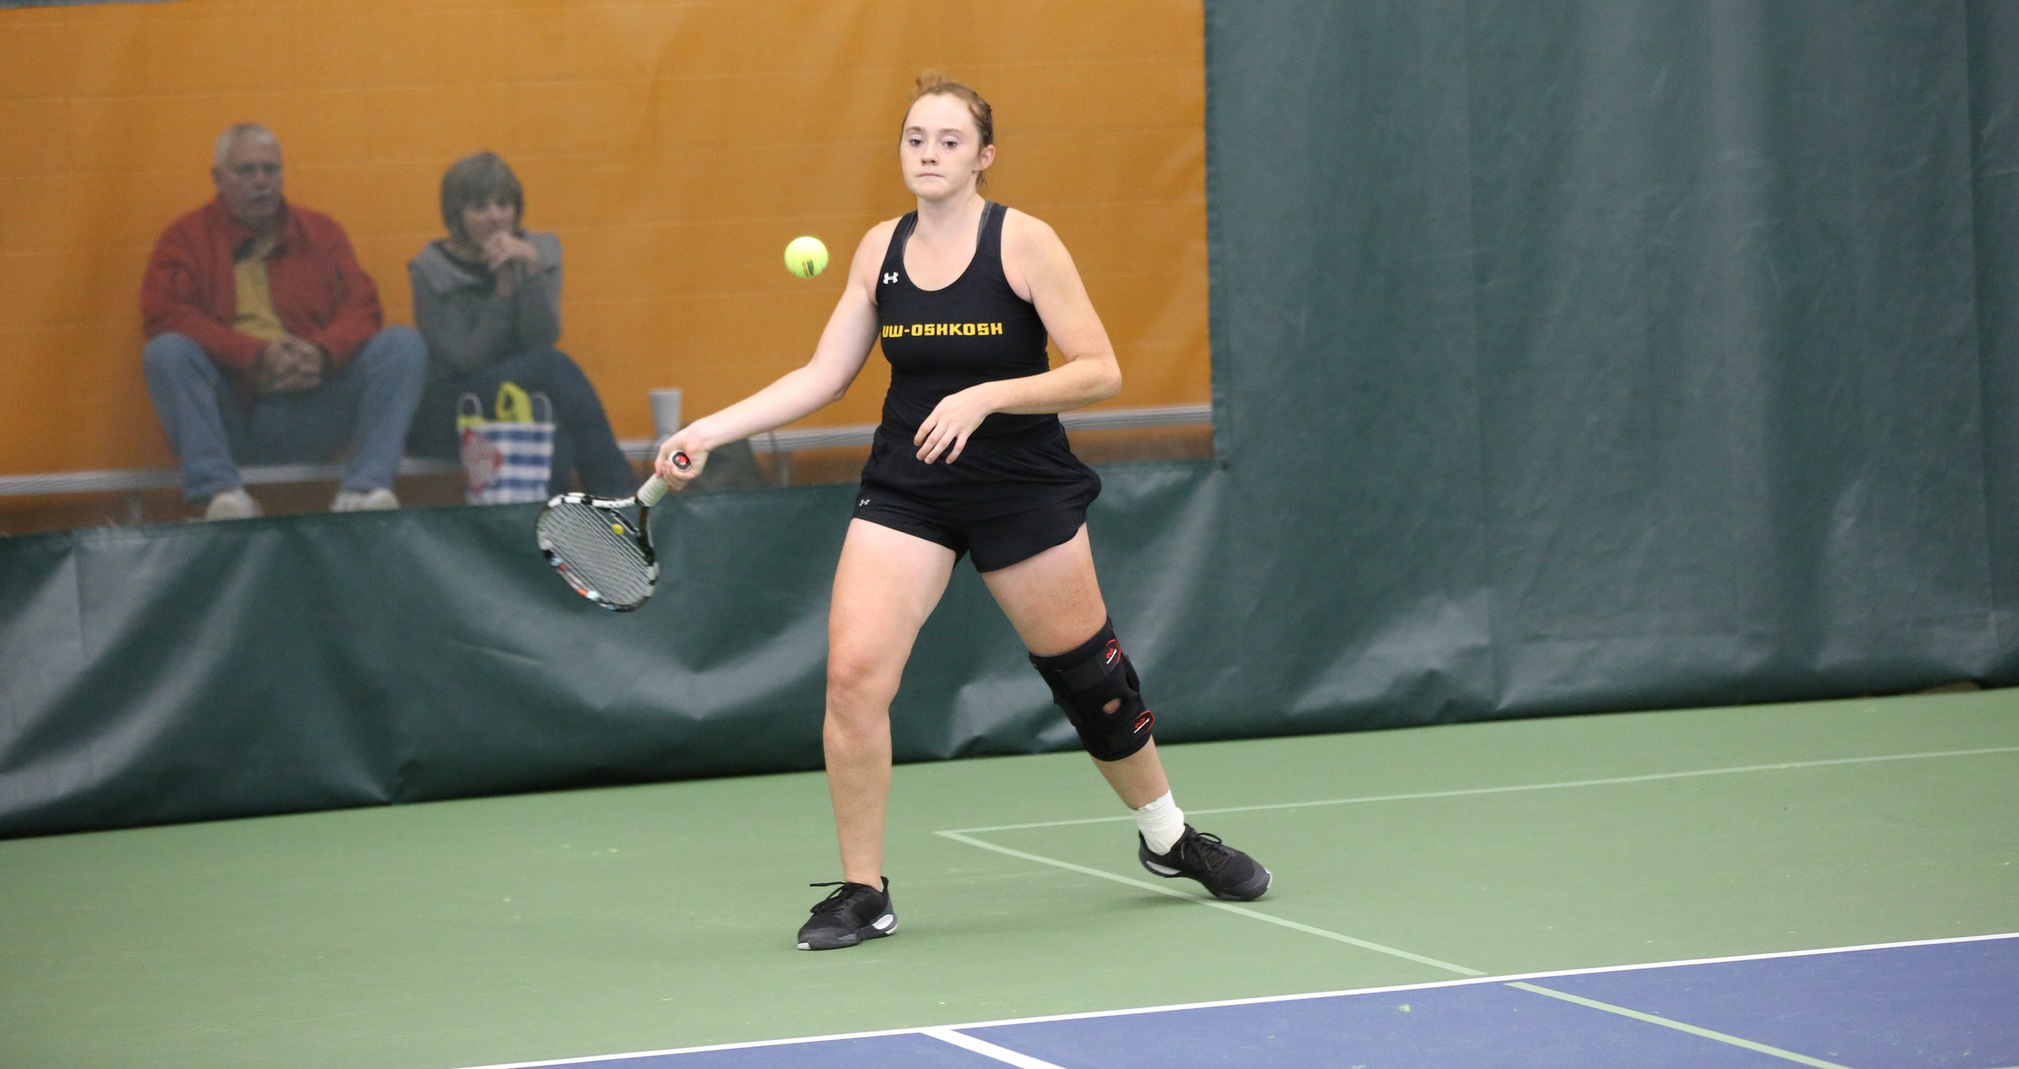 Taylor Johnson recorded wins against the Blue Devils at both No. 6 singles and No. 3 doubles.